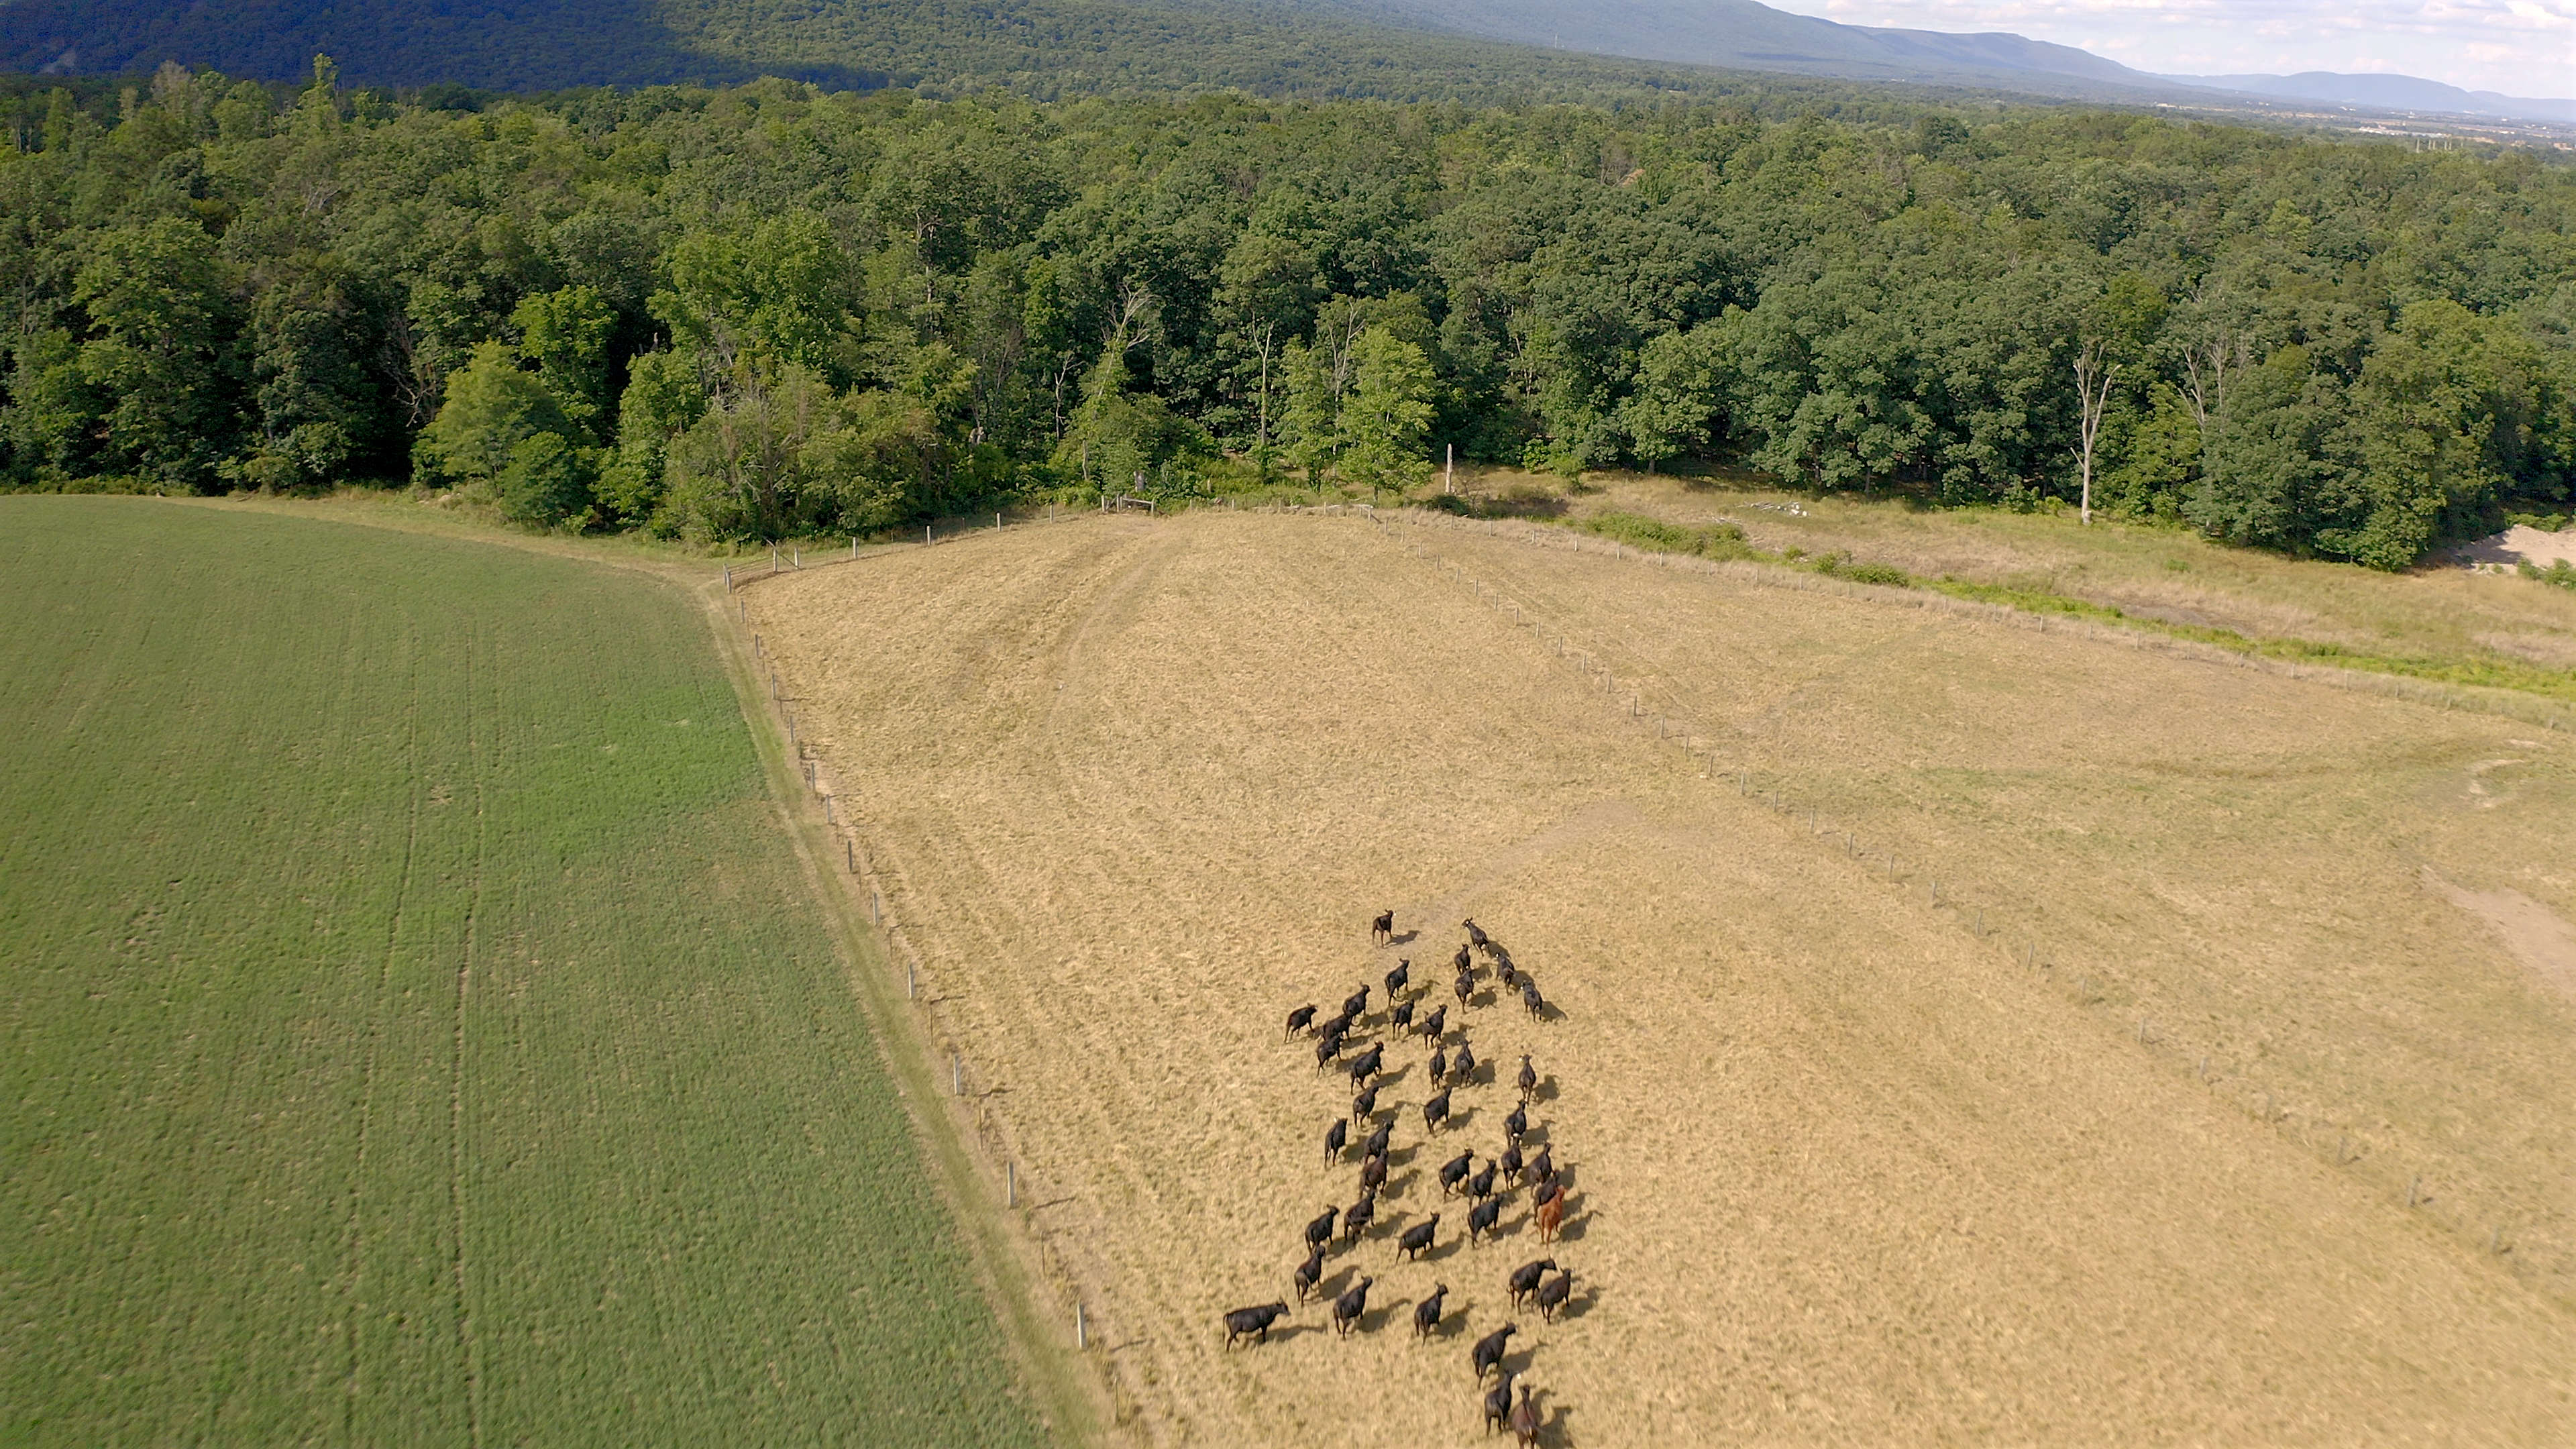 Drone video of cattle stampeding in pasture of rural farm